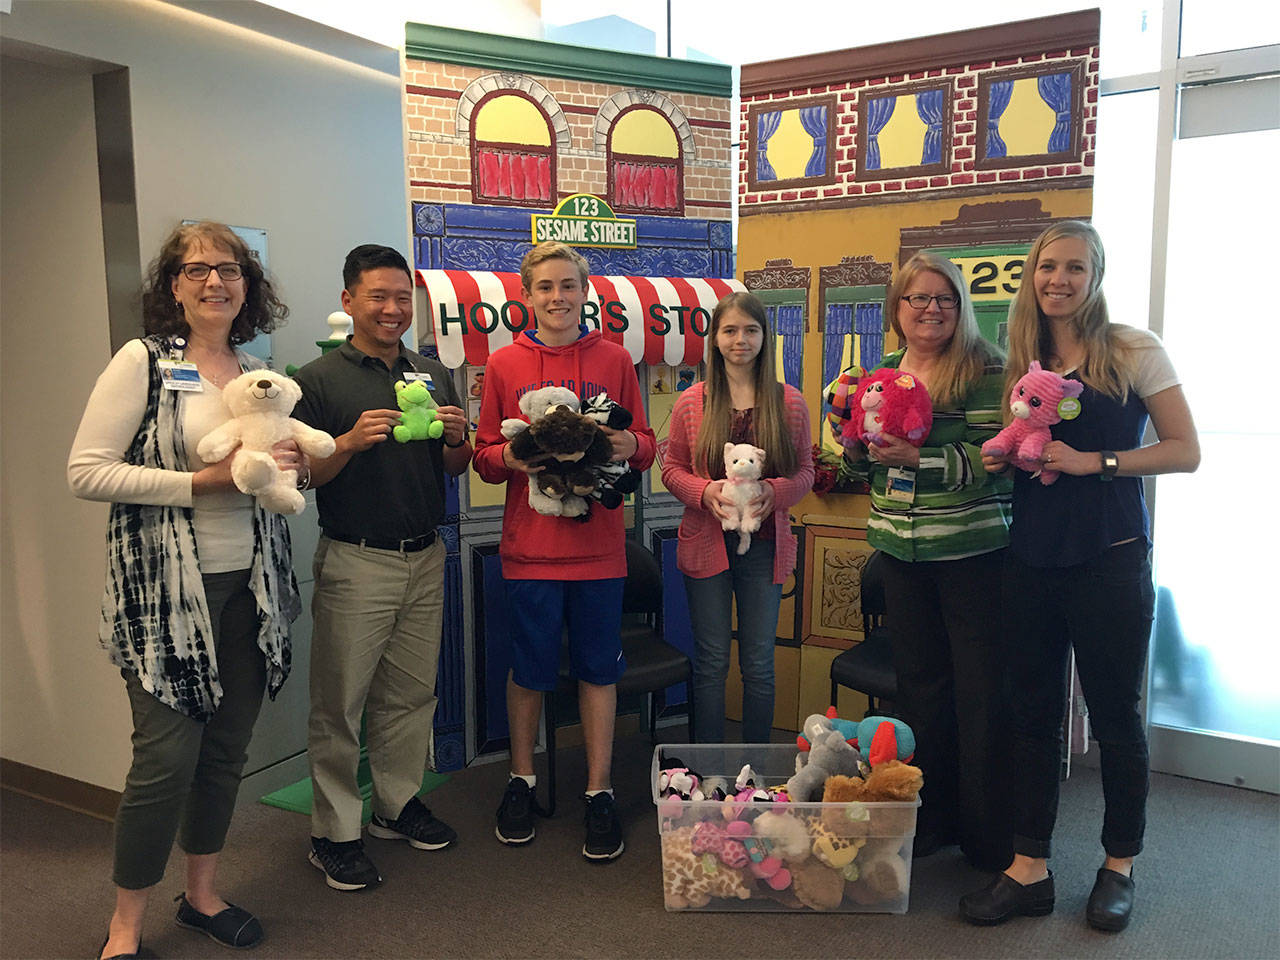 Staff members from the Children’s Center at Providence Regional Medical Center Everett accept a donation of stuffed animals from Olympic View Middle School students (center) Josh Clogston and Heike Cyphert. Not pictured is classmate Khyara Jordan. (Contributed photo)